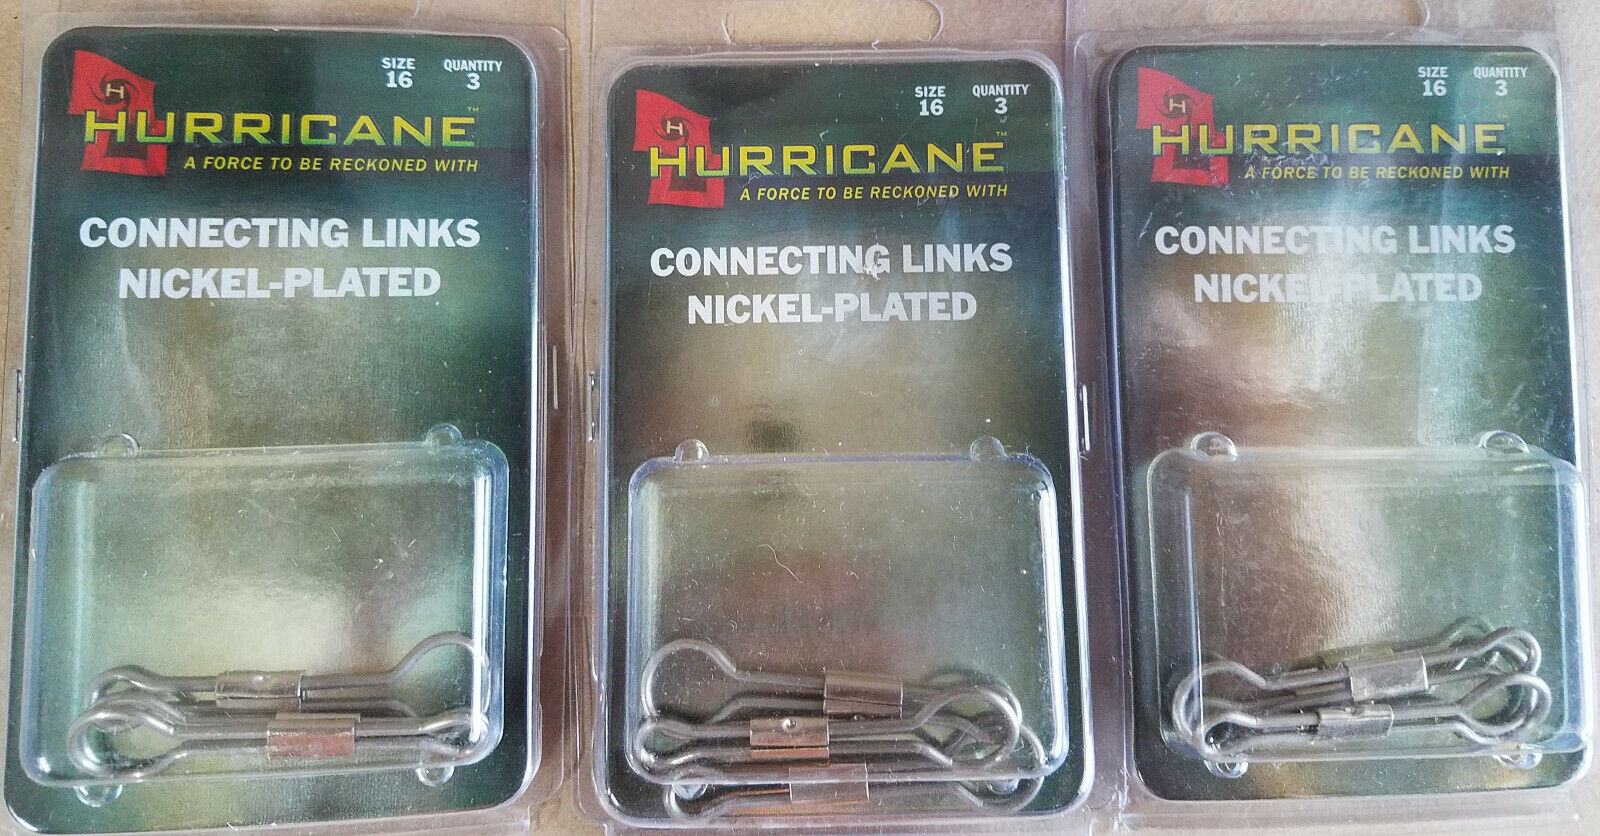 Hurricane CL-16 Connecting Links, Nickel Plated 3 Packs of 3-FREE SHIPPING Hurricane Does Not Apply